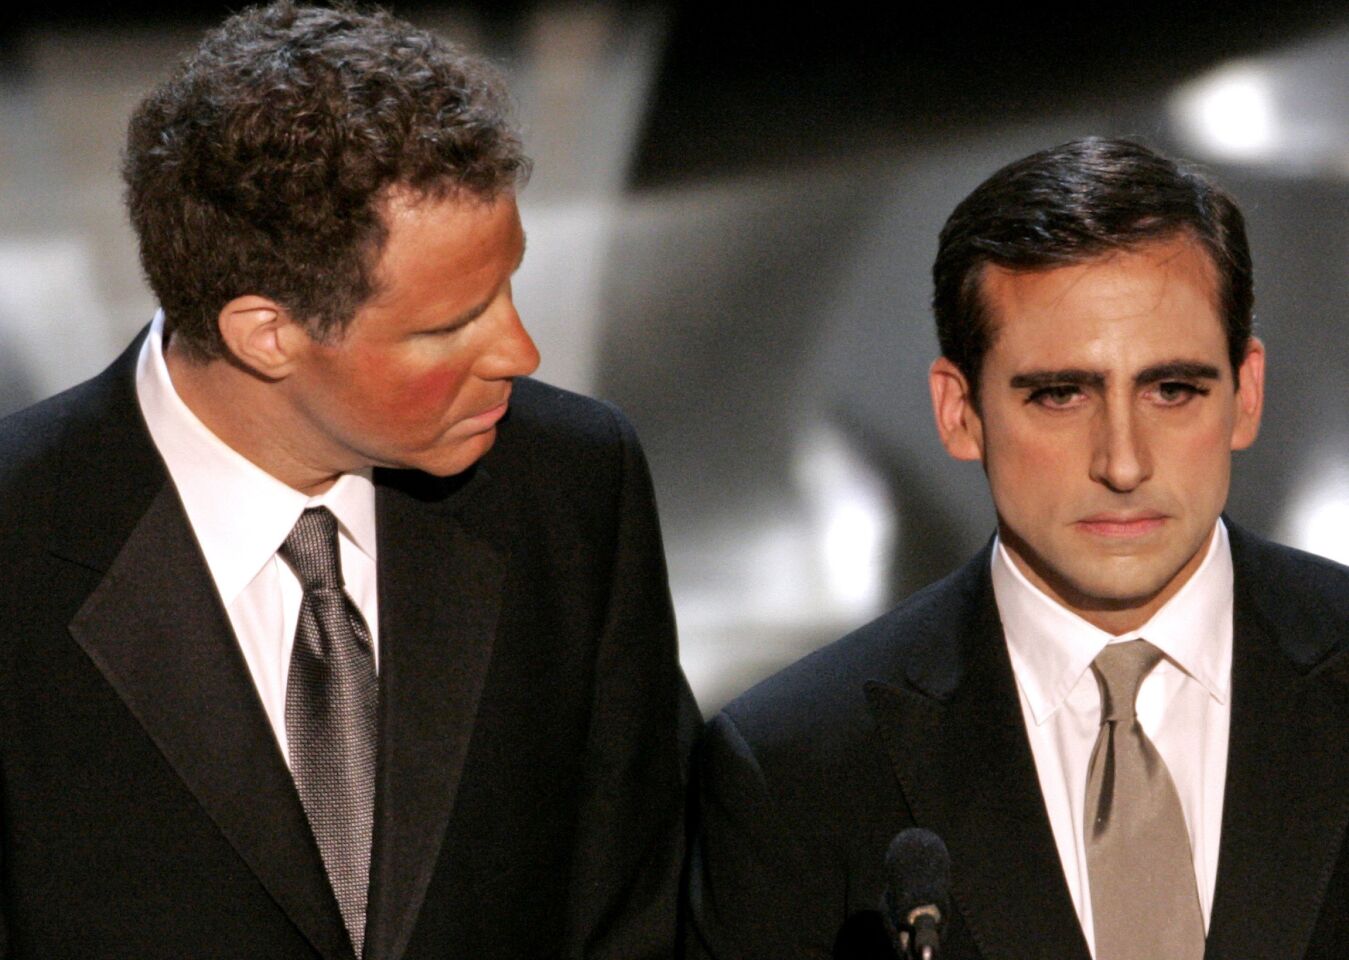 Actors Will Ferrell, left and Steve Carell present the Oscar for makeup during the 78th Academy Awards at the Kodak Theatre.